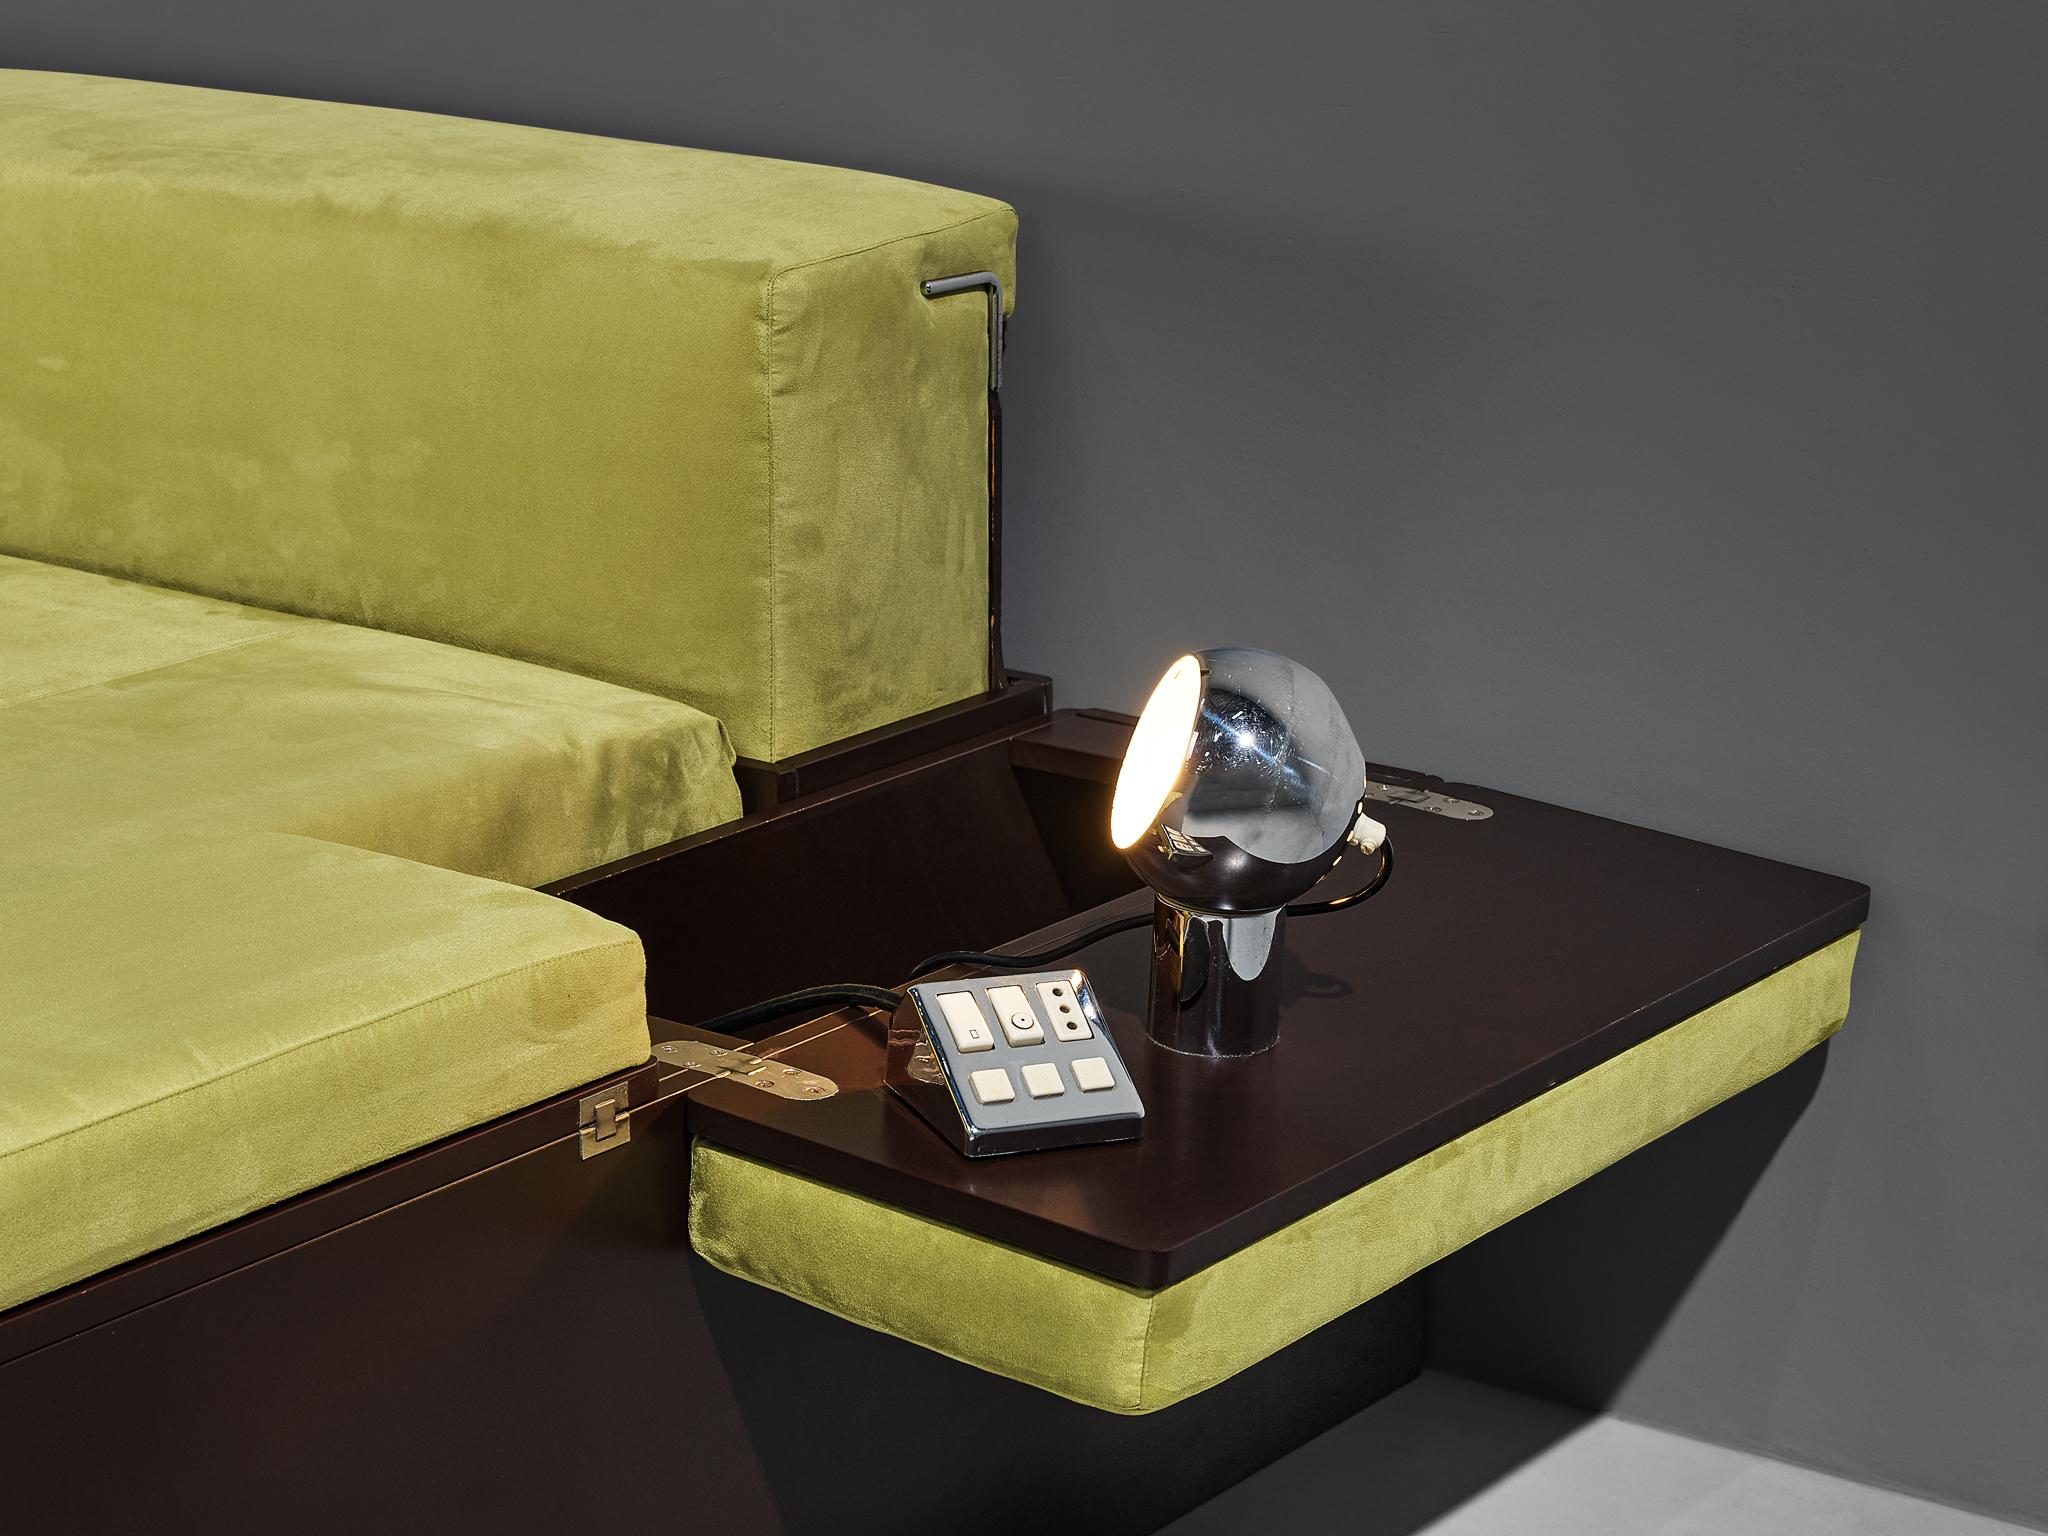 Metal Luciano Bertoncini for Cjfra 'Zattera' Bed in Alcantara and Lacquered Wood  For Sale